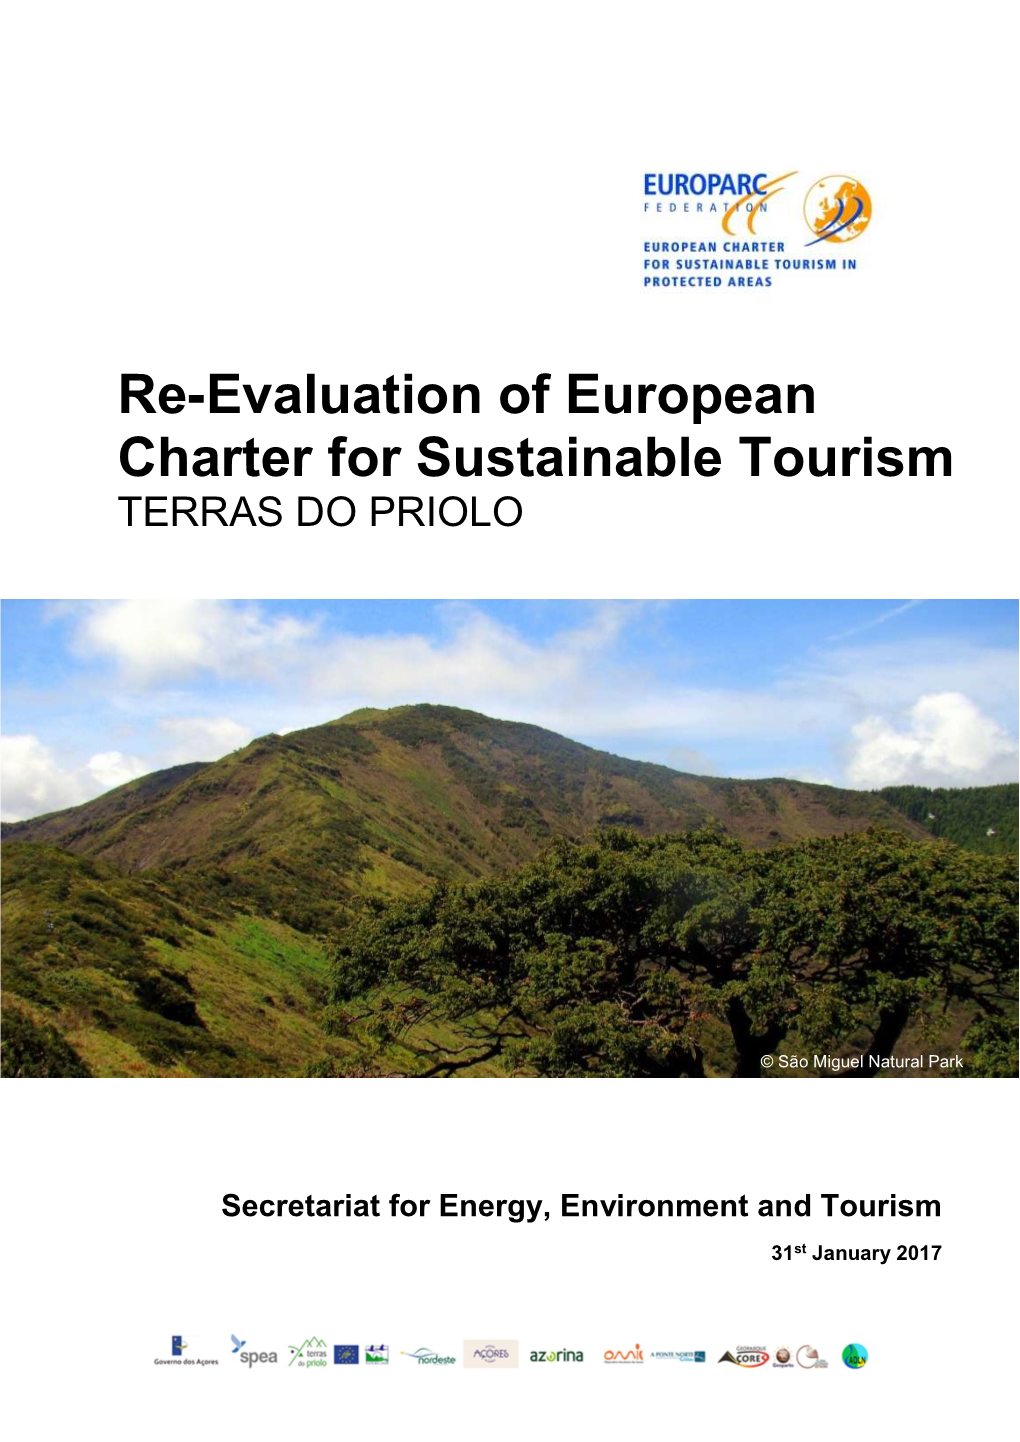 Re-Evaluation of European Charter for Sustainable Tourism TERRAS DO PRIOLO